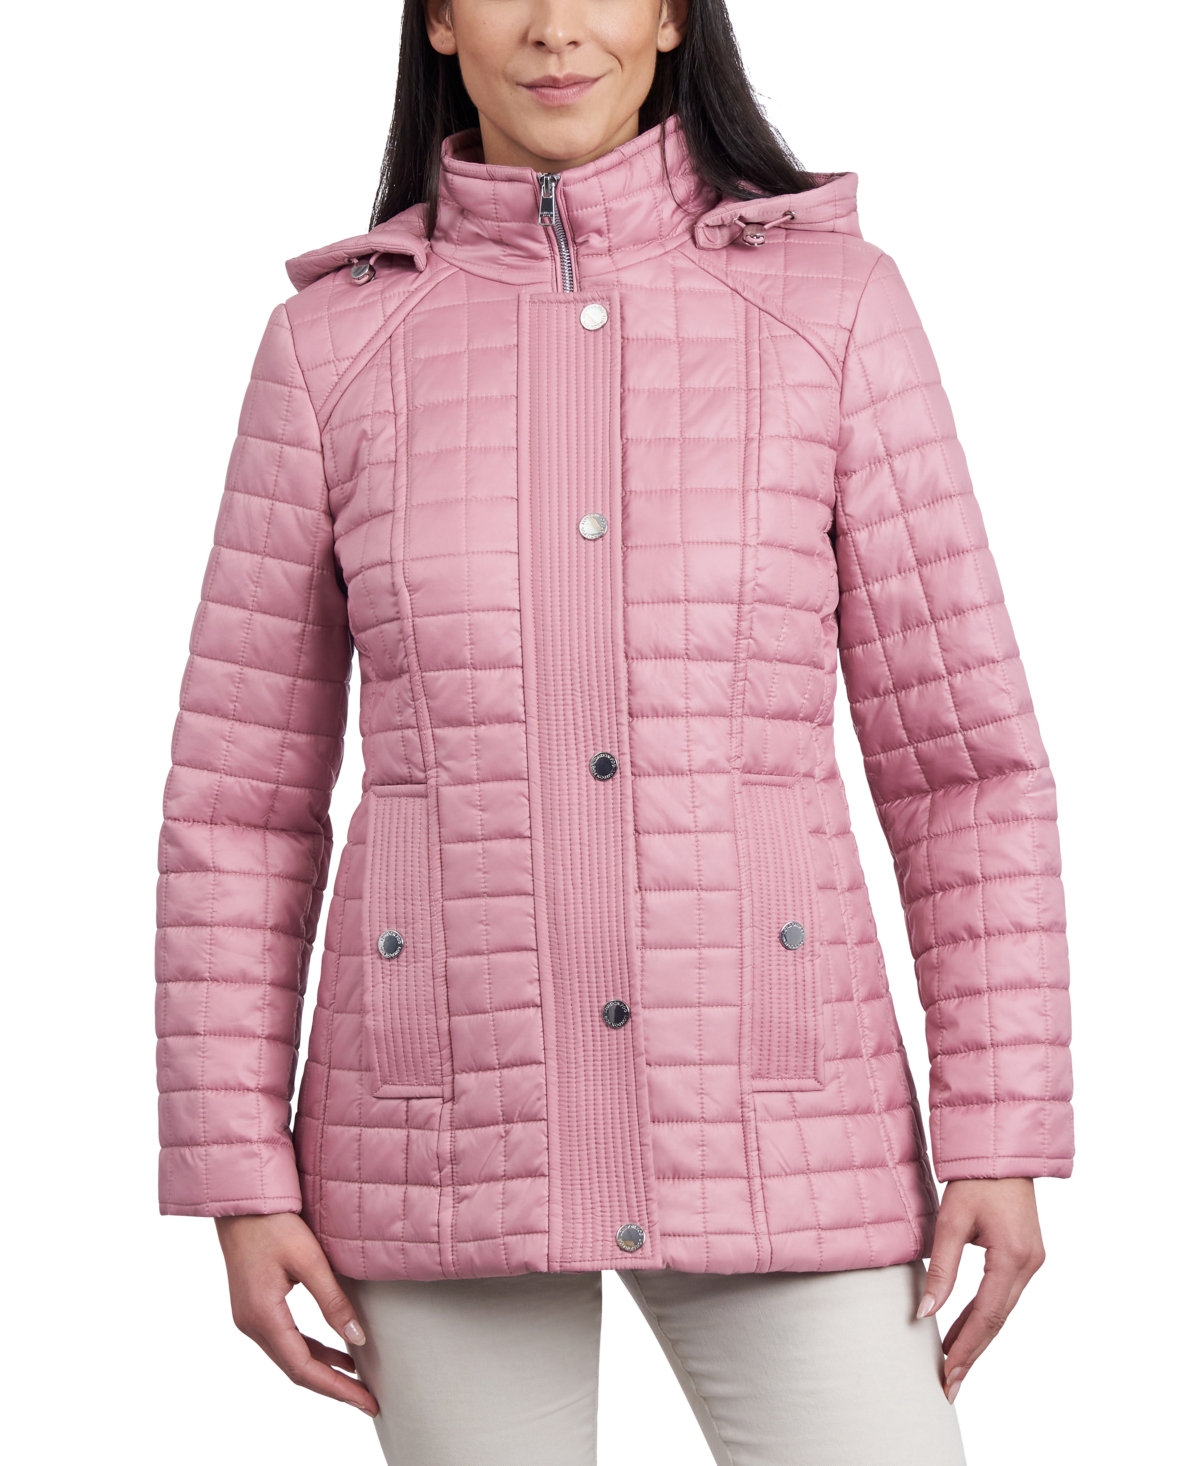 Women's Petite Hooded Quilted Water-Resistant Coat - Heather